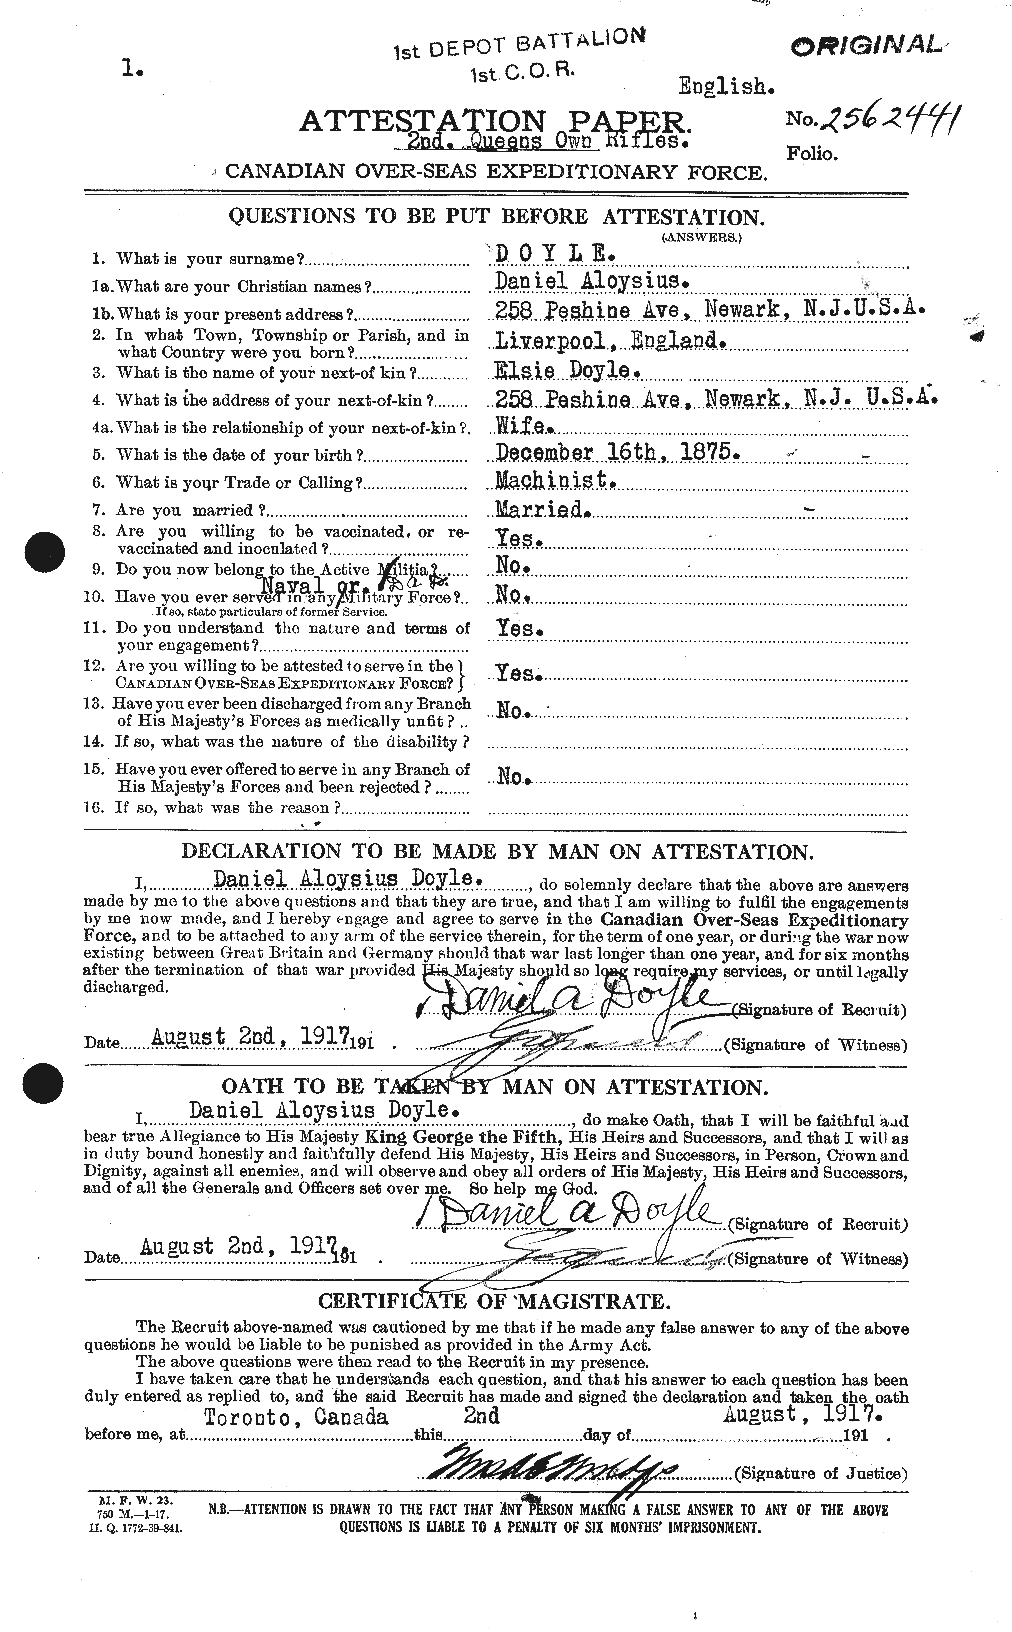 Personnel Records of the First World War - CEF 298446a